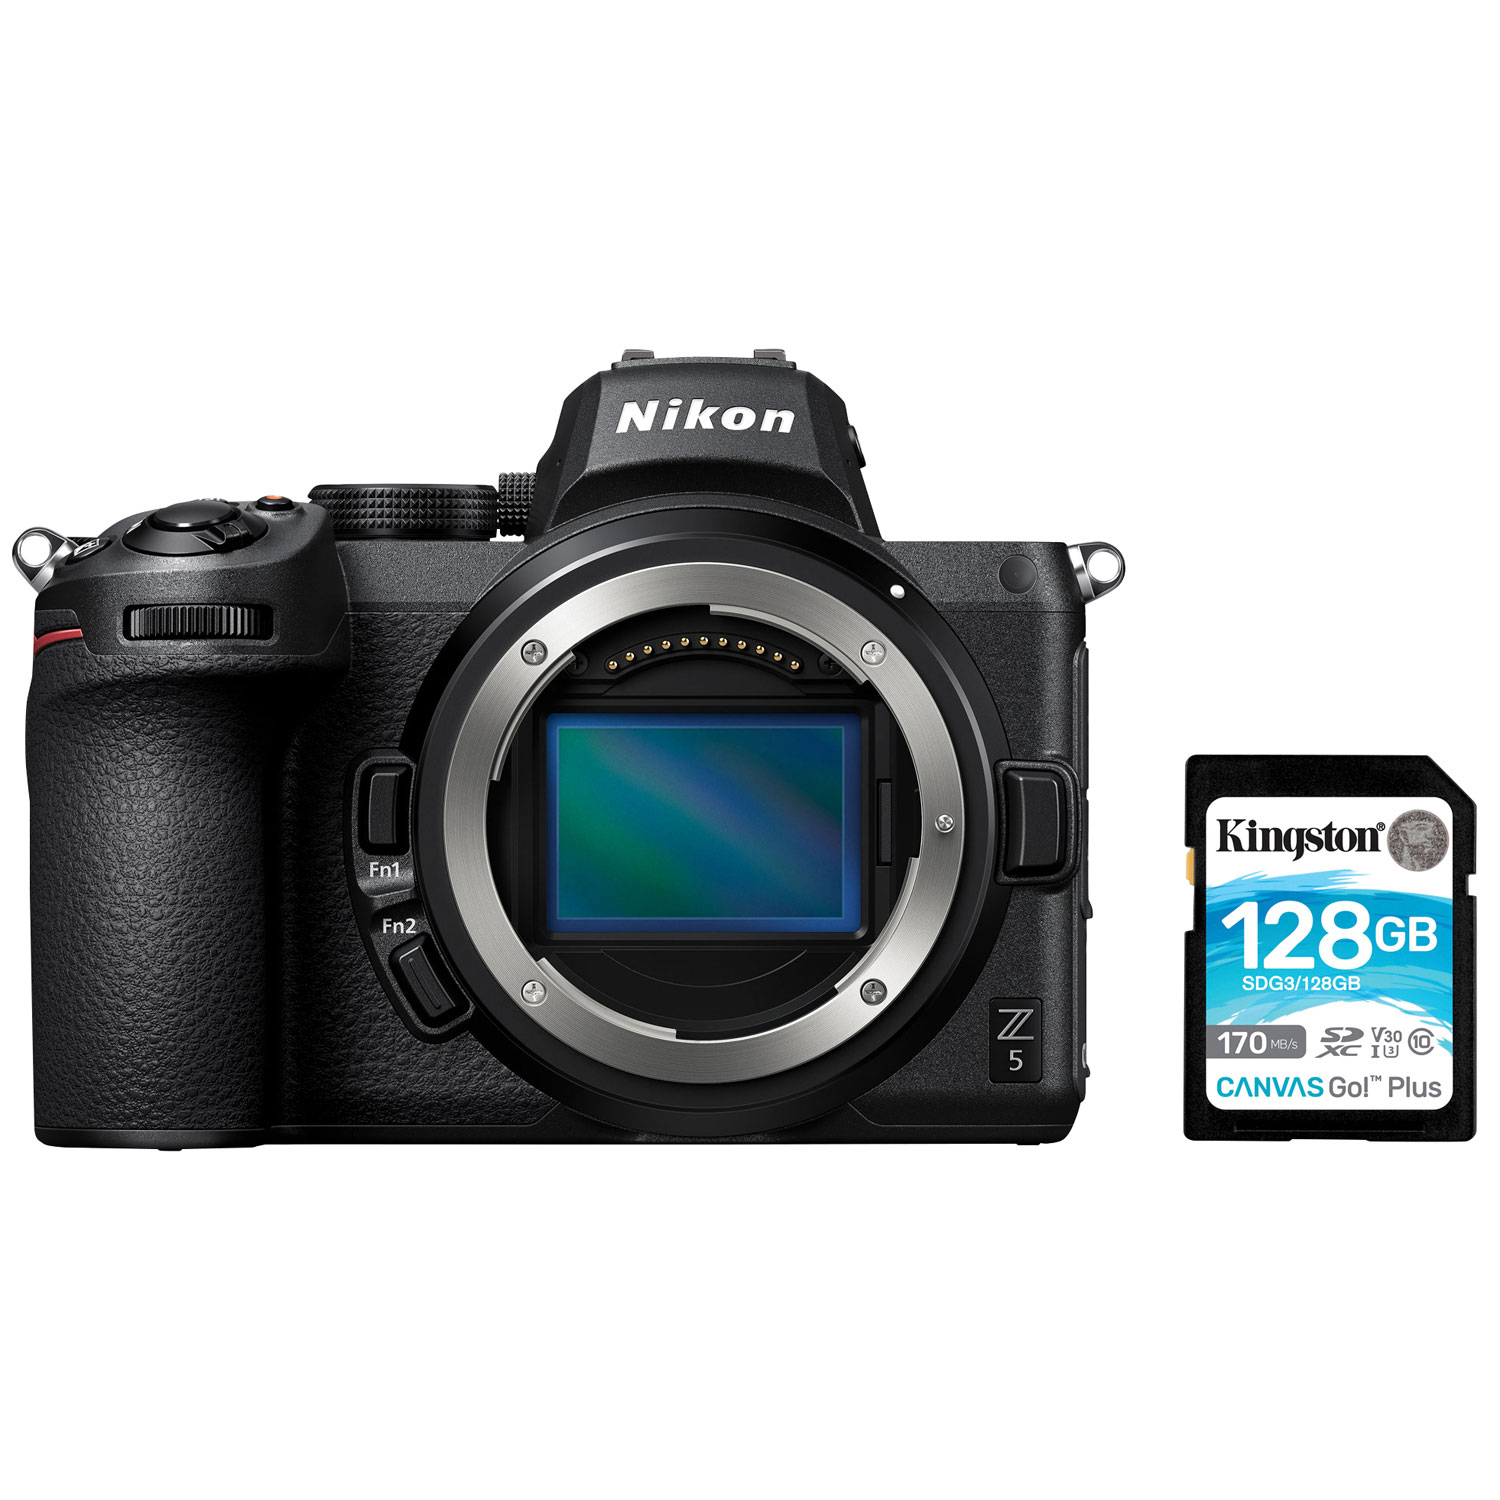 Nikon Z 5 Full-Frame Mirrorless Camera (Body Only) with 128GB Memory Card